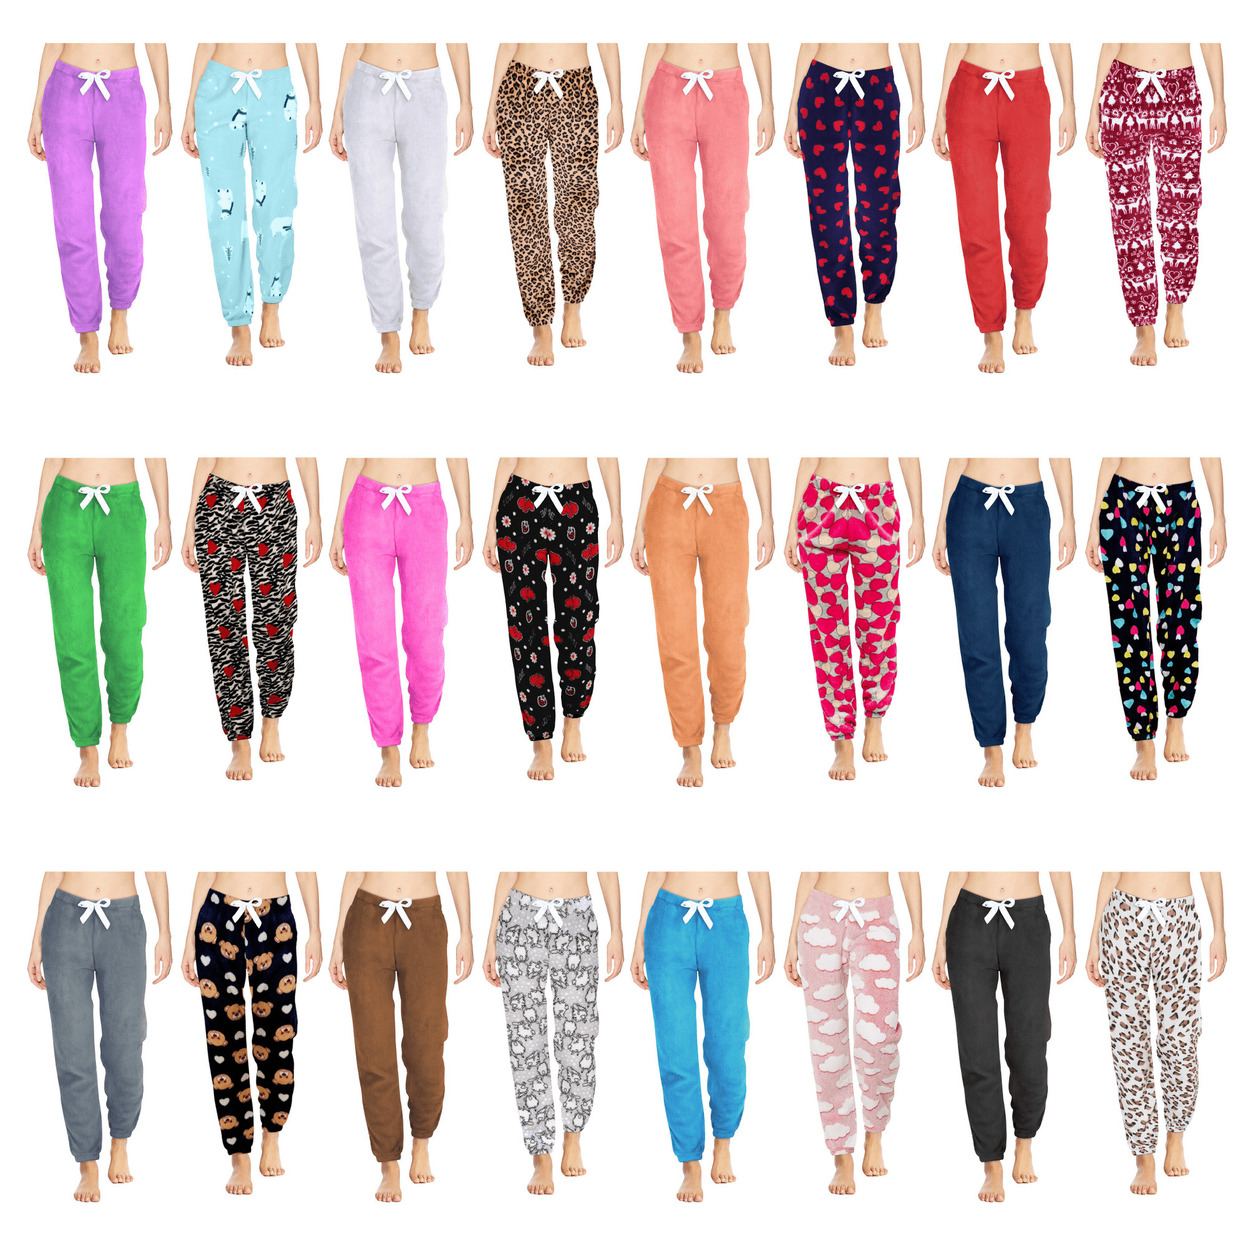 Multi-Pack: Women's Solid & Printed Ultra-Soft Comfy Stretch Micro-Fleece Pajama Lounge Pants - 3-pack, X-large, Solid